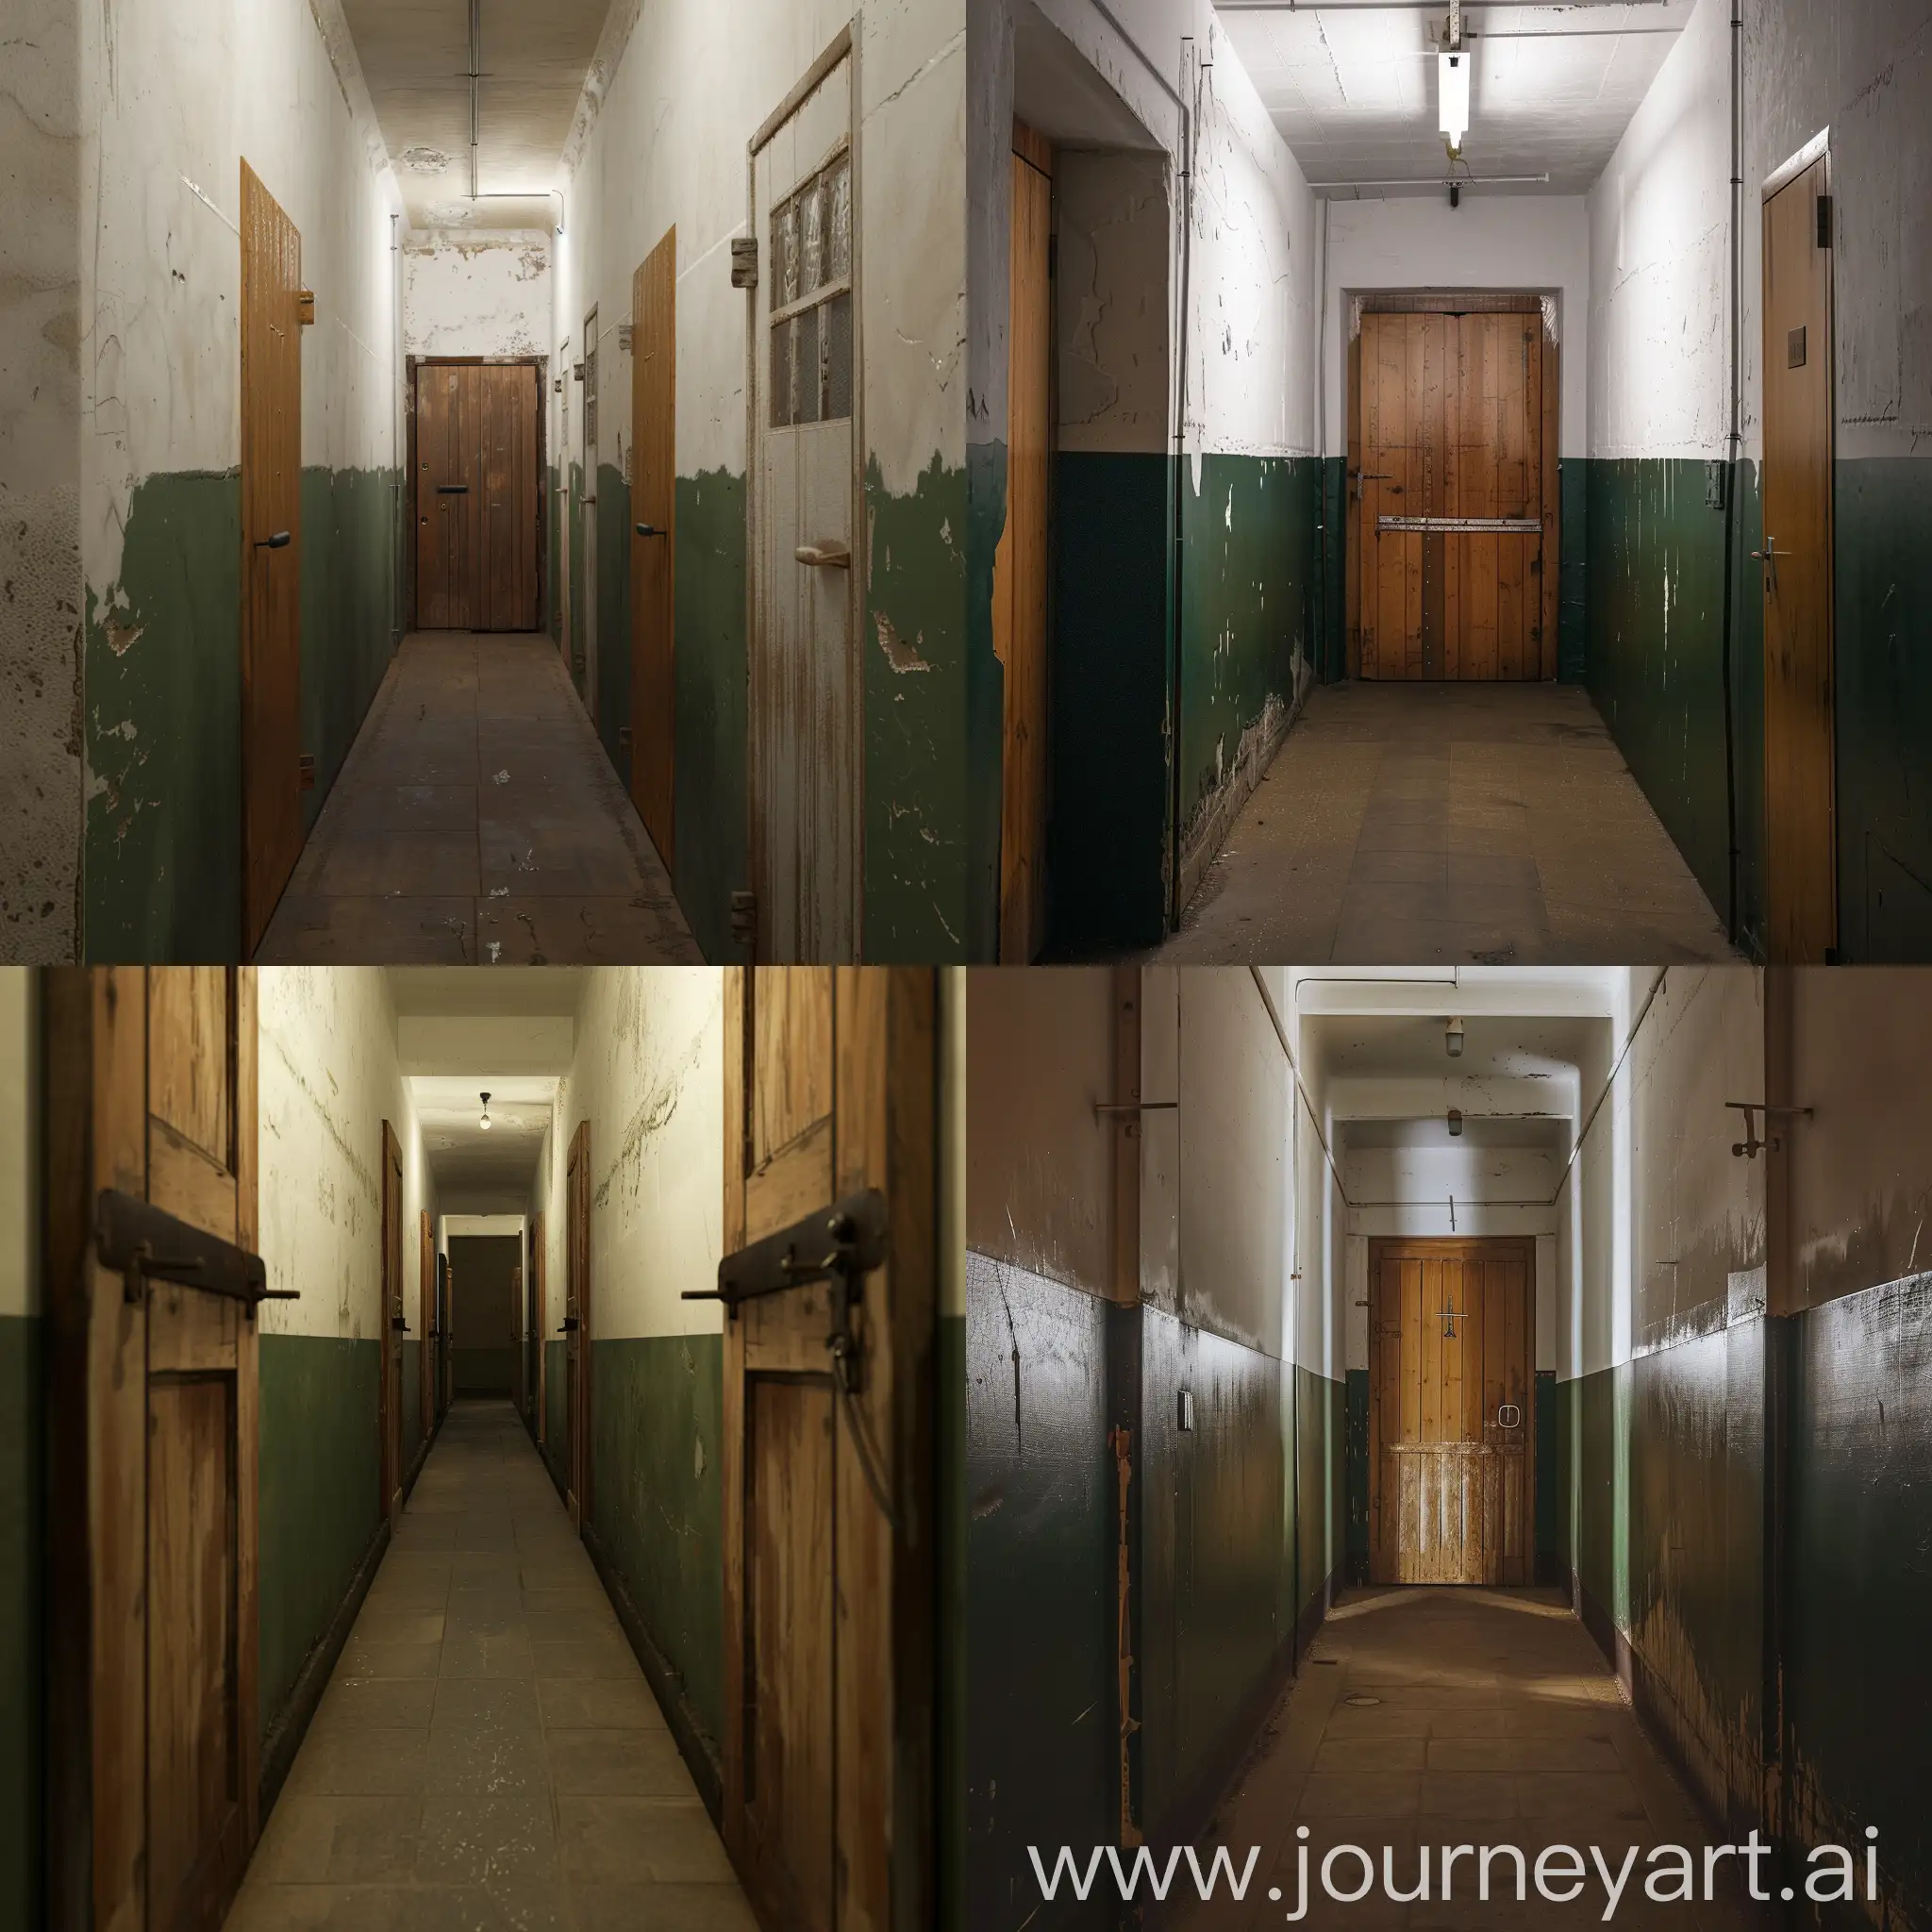 The corridor of the military headquarters, at the end there is a wooden door, a metal door handle, the walls of the headquarters are painted white on the top, green on the bottom, on the sides. corridor wooden doors, hyper-realism, gloomy dim lighting, hyperrealism, 8K image quality
